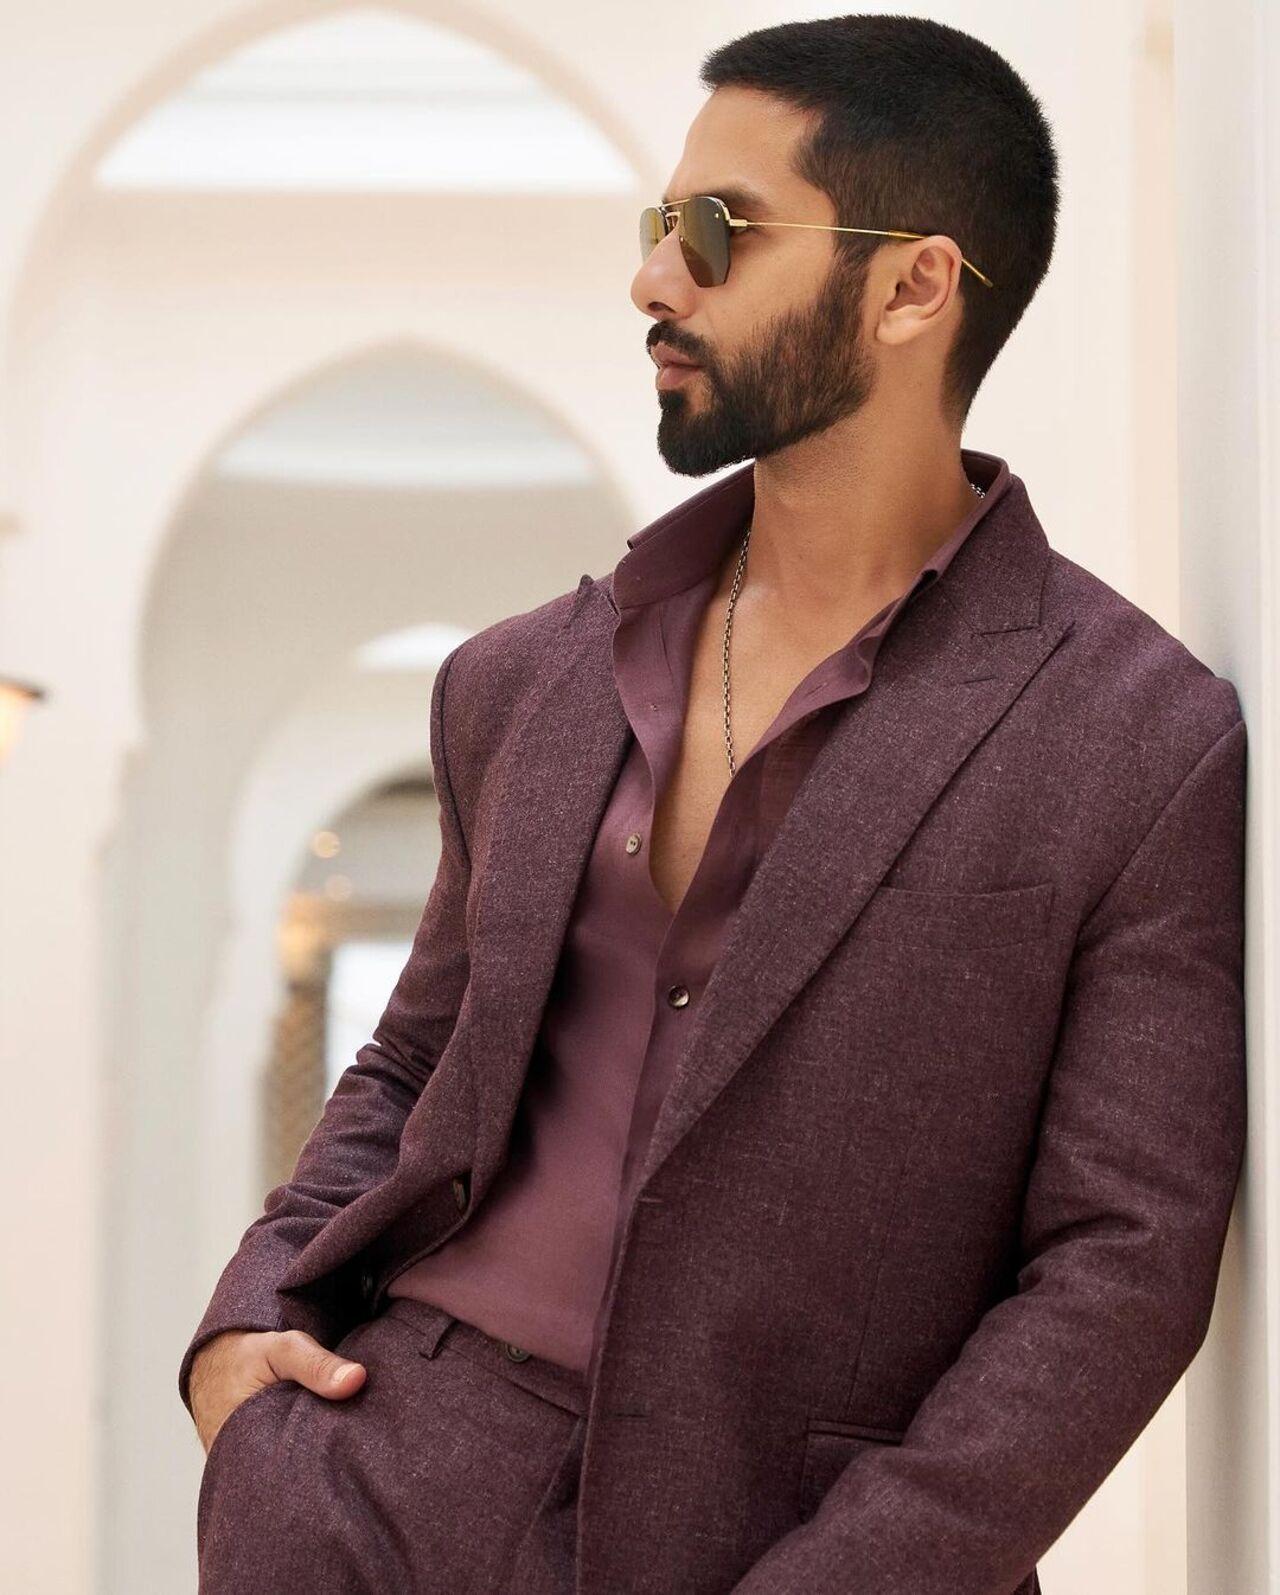 Shahid Kapoor gives an old-school gangster vibe in this outfit. His well-trimmed beard and short hair add to the look